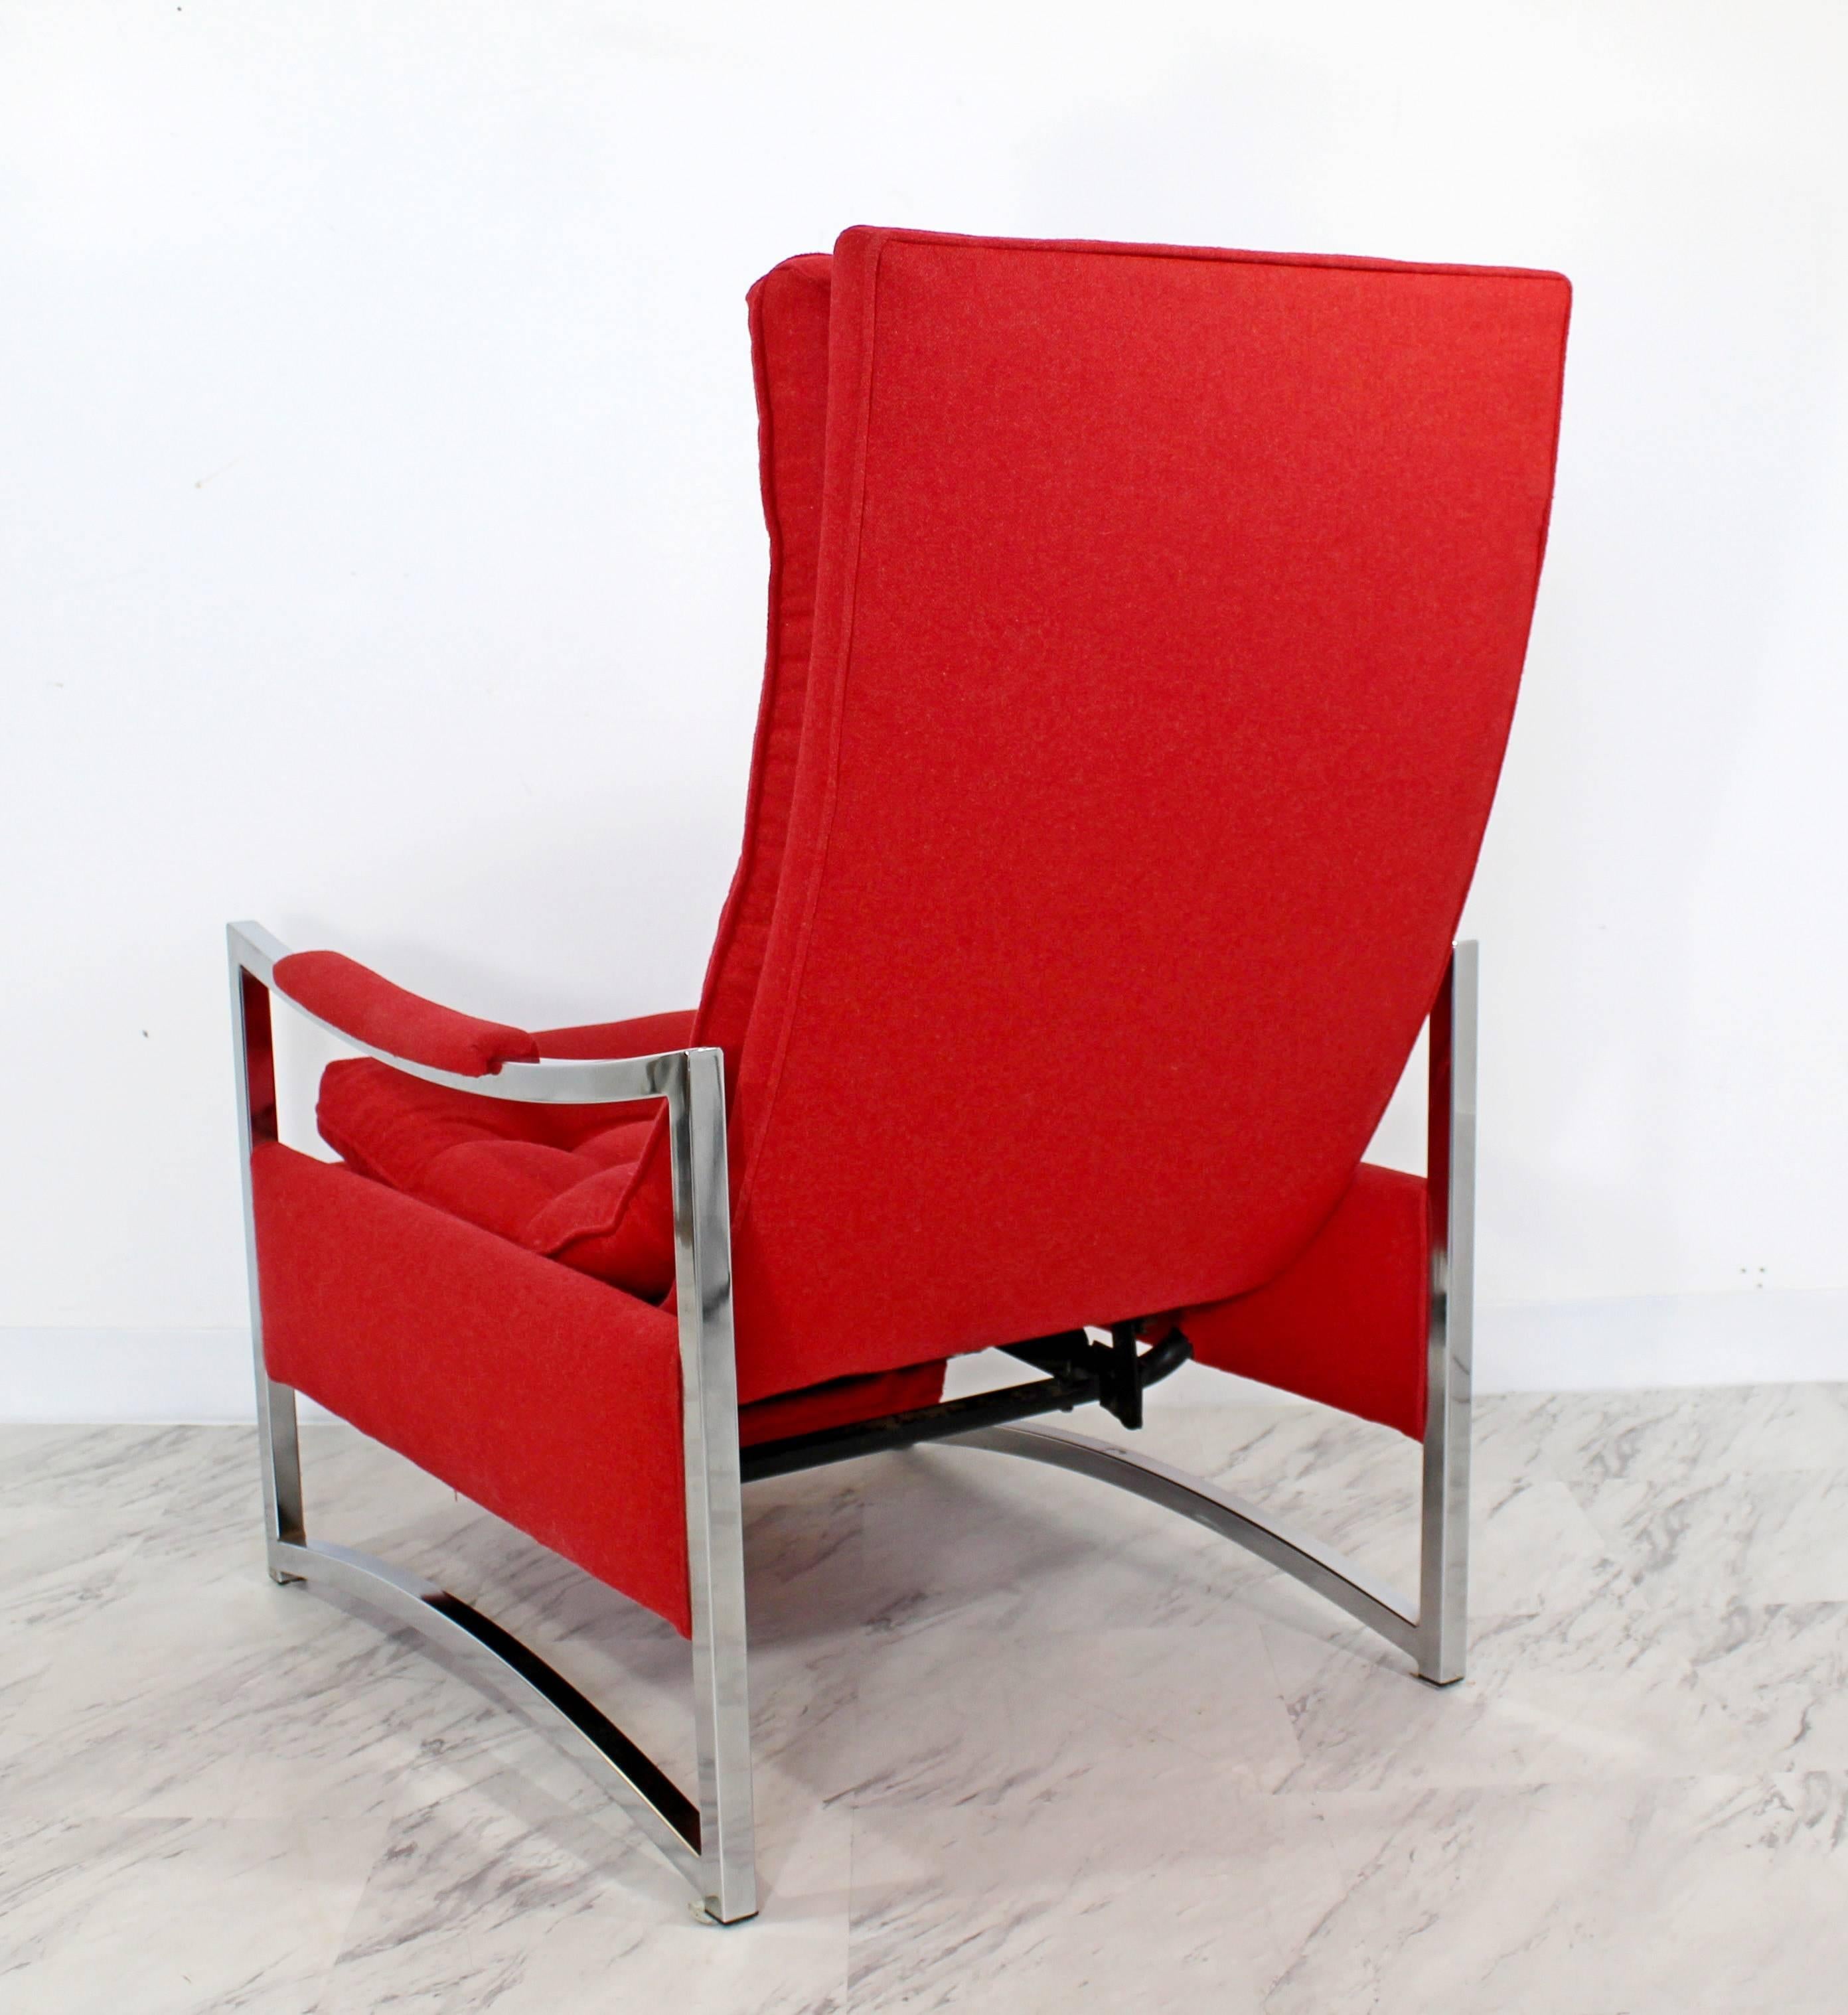 For your consideration is a glamorous, curved chrome recliner by Milo Baughman, recently redone in a red, Robert Allen wool. In excellent condition. The dimensions are 24.5" W x 36" (3')/58" D x 39" H x 17" S.H.